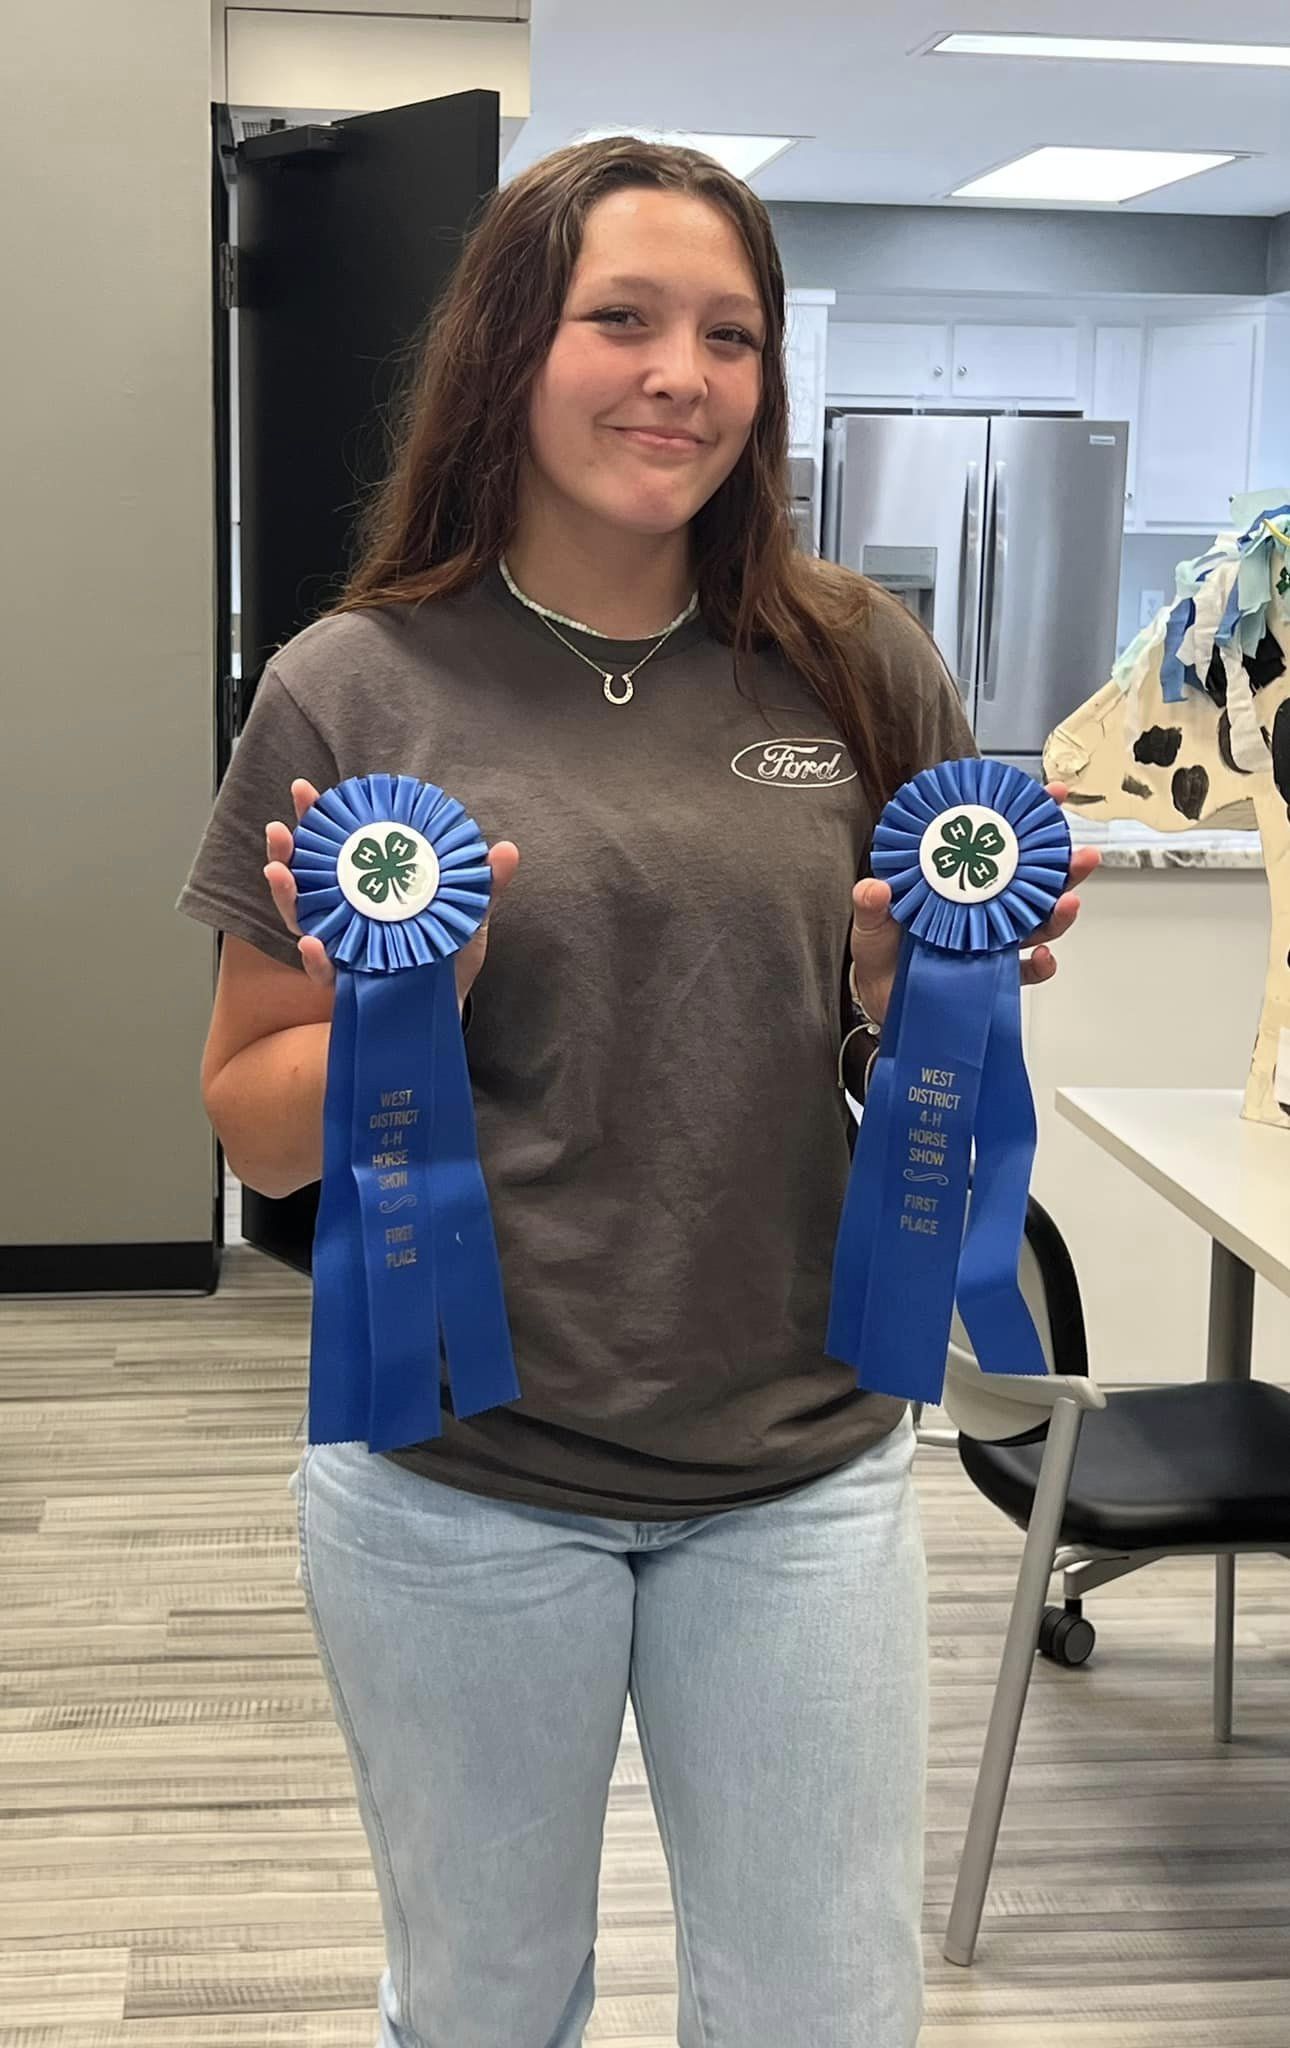 A teenage girl poses with two blue ribbons.